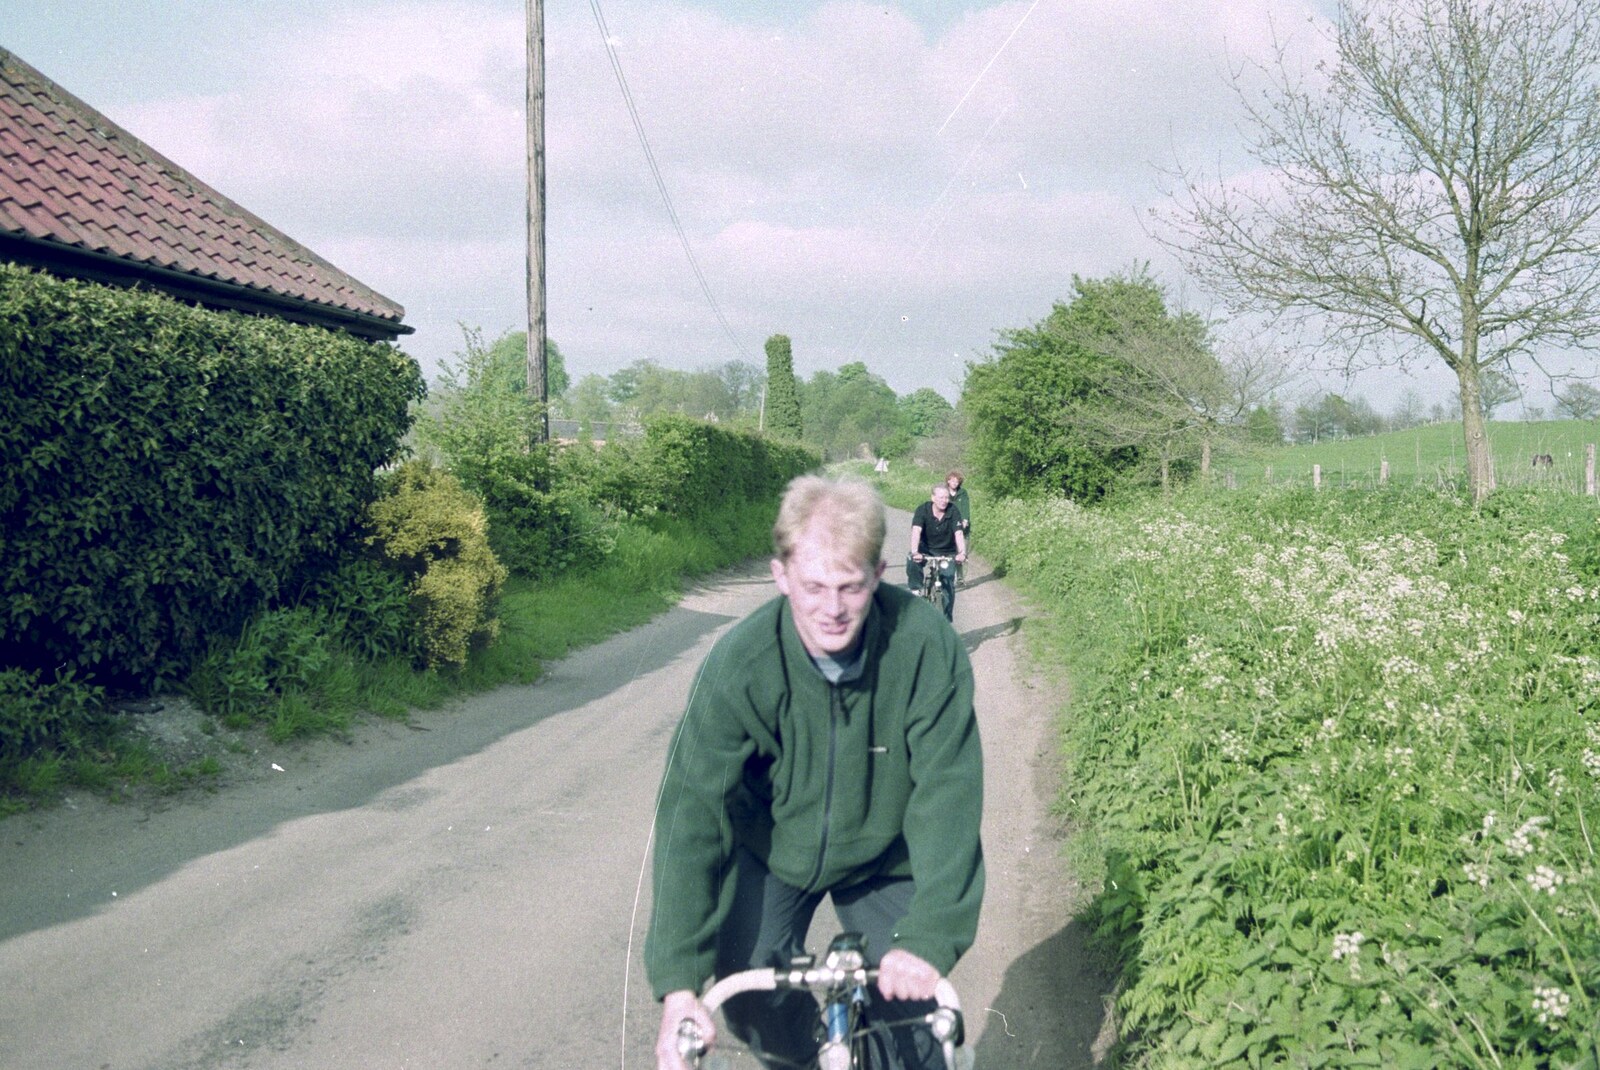 Paul cycles past from A BSCC Bike Ride, Brockdish Greyhound and Hoxne Swan, Suffolk - 4th May 2000